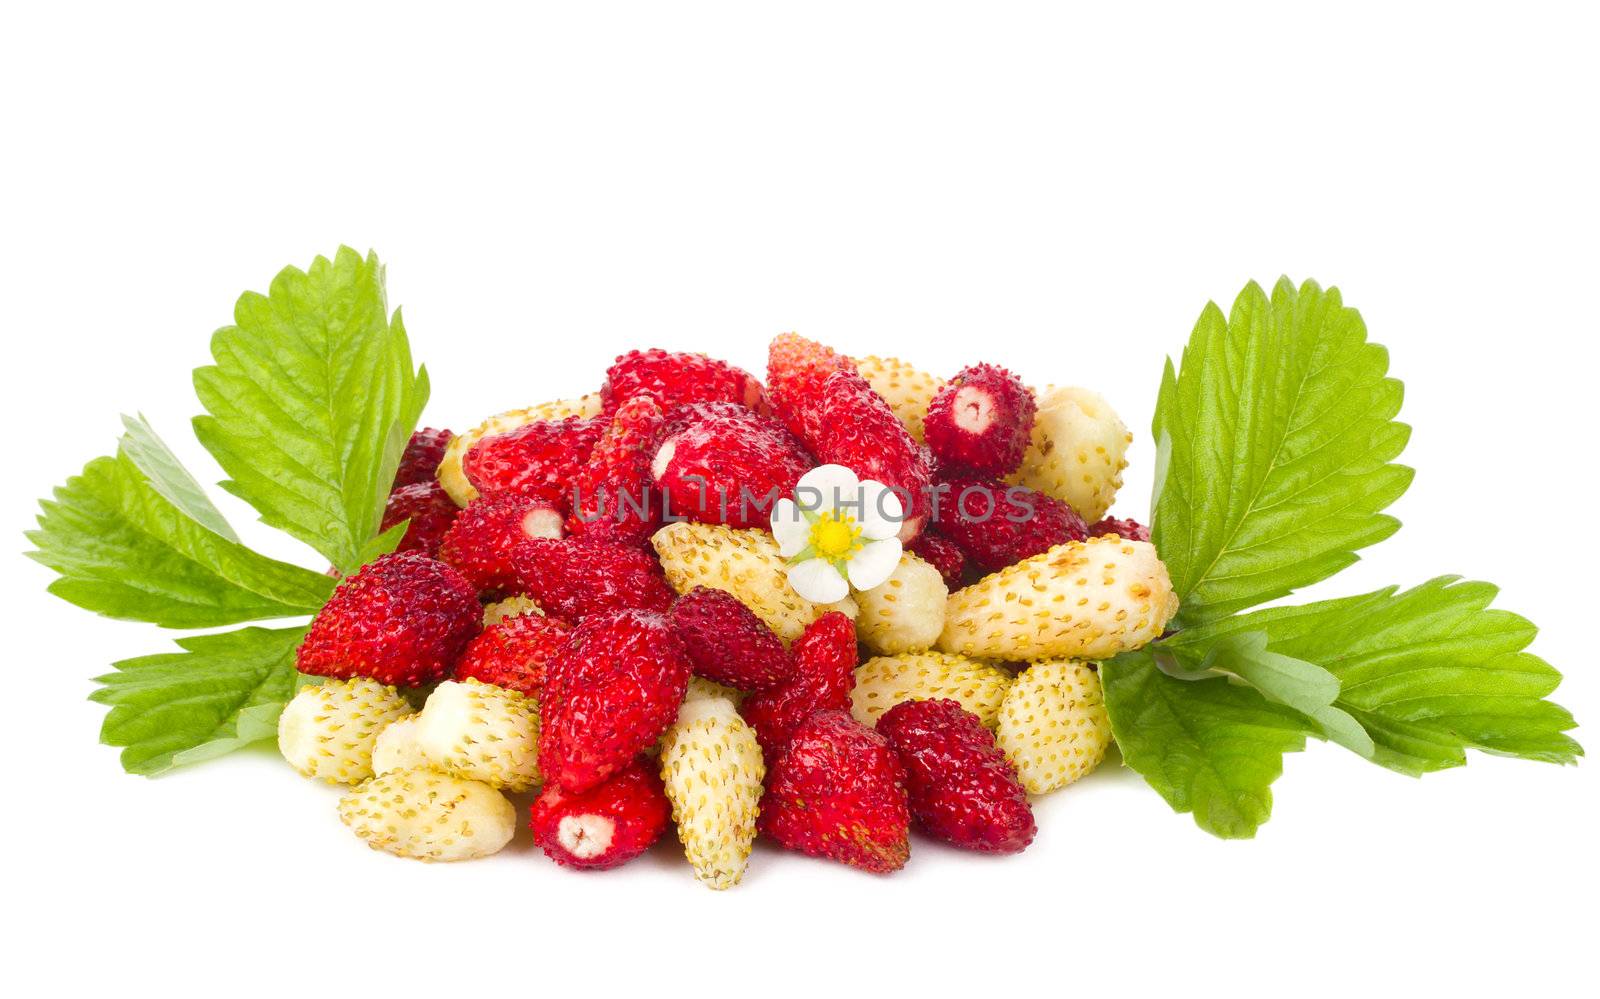 wild strawberries with flower and leaves by Alekcey